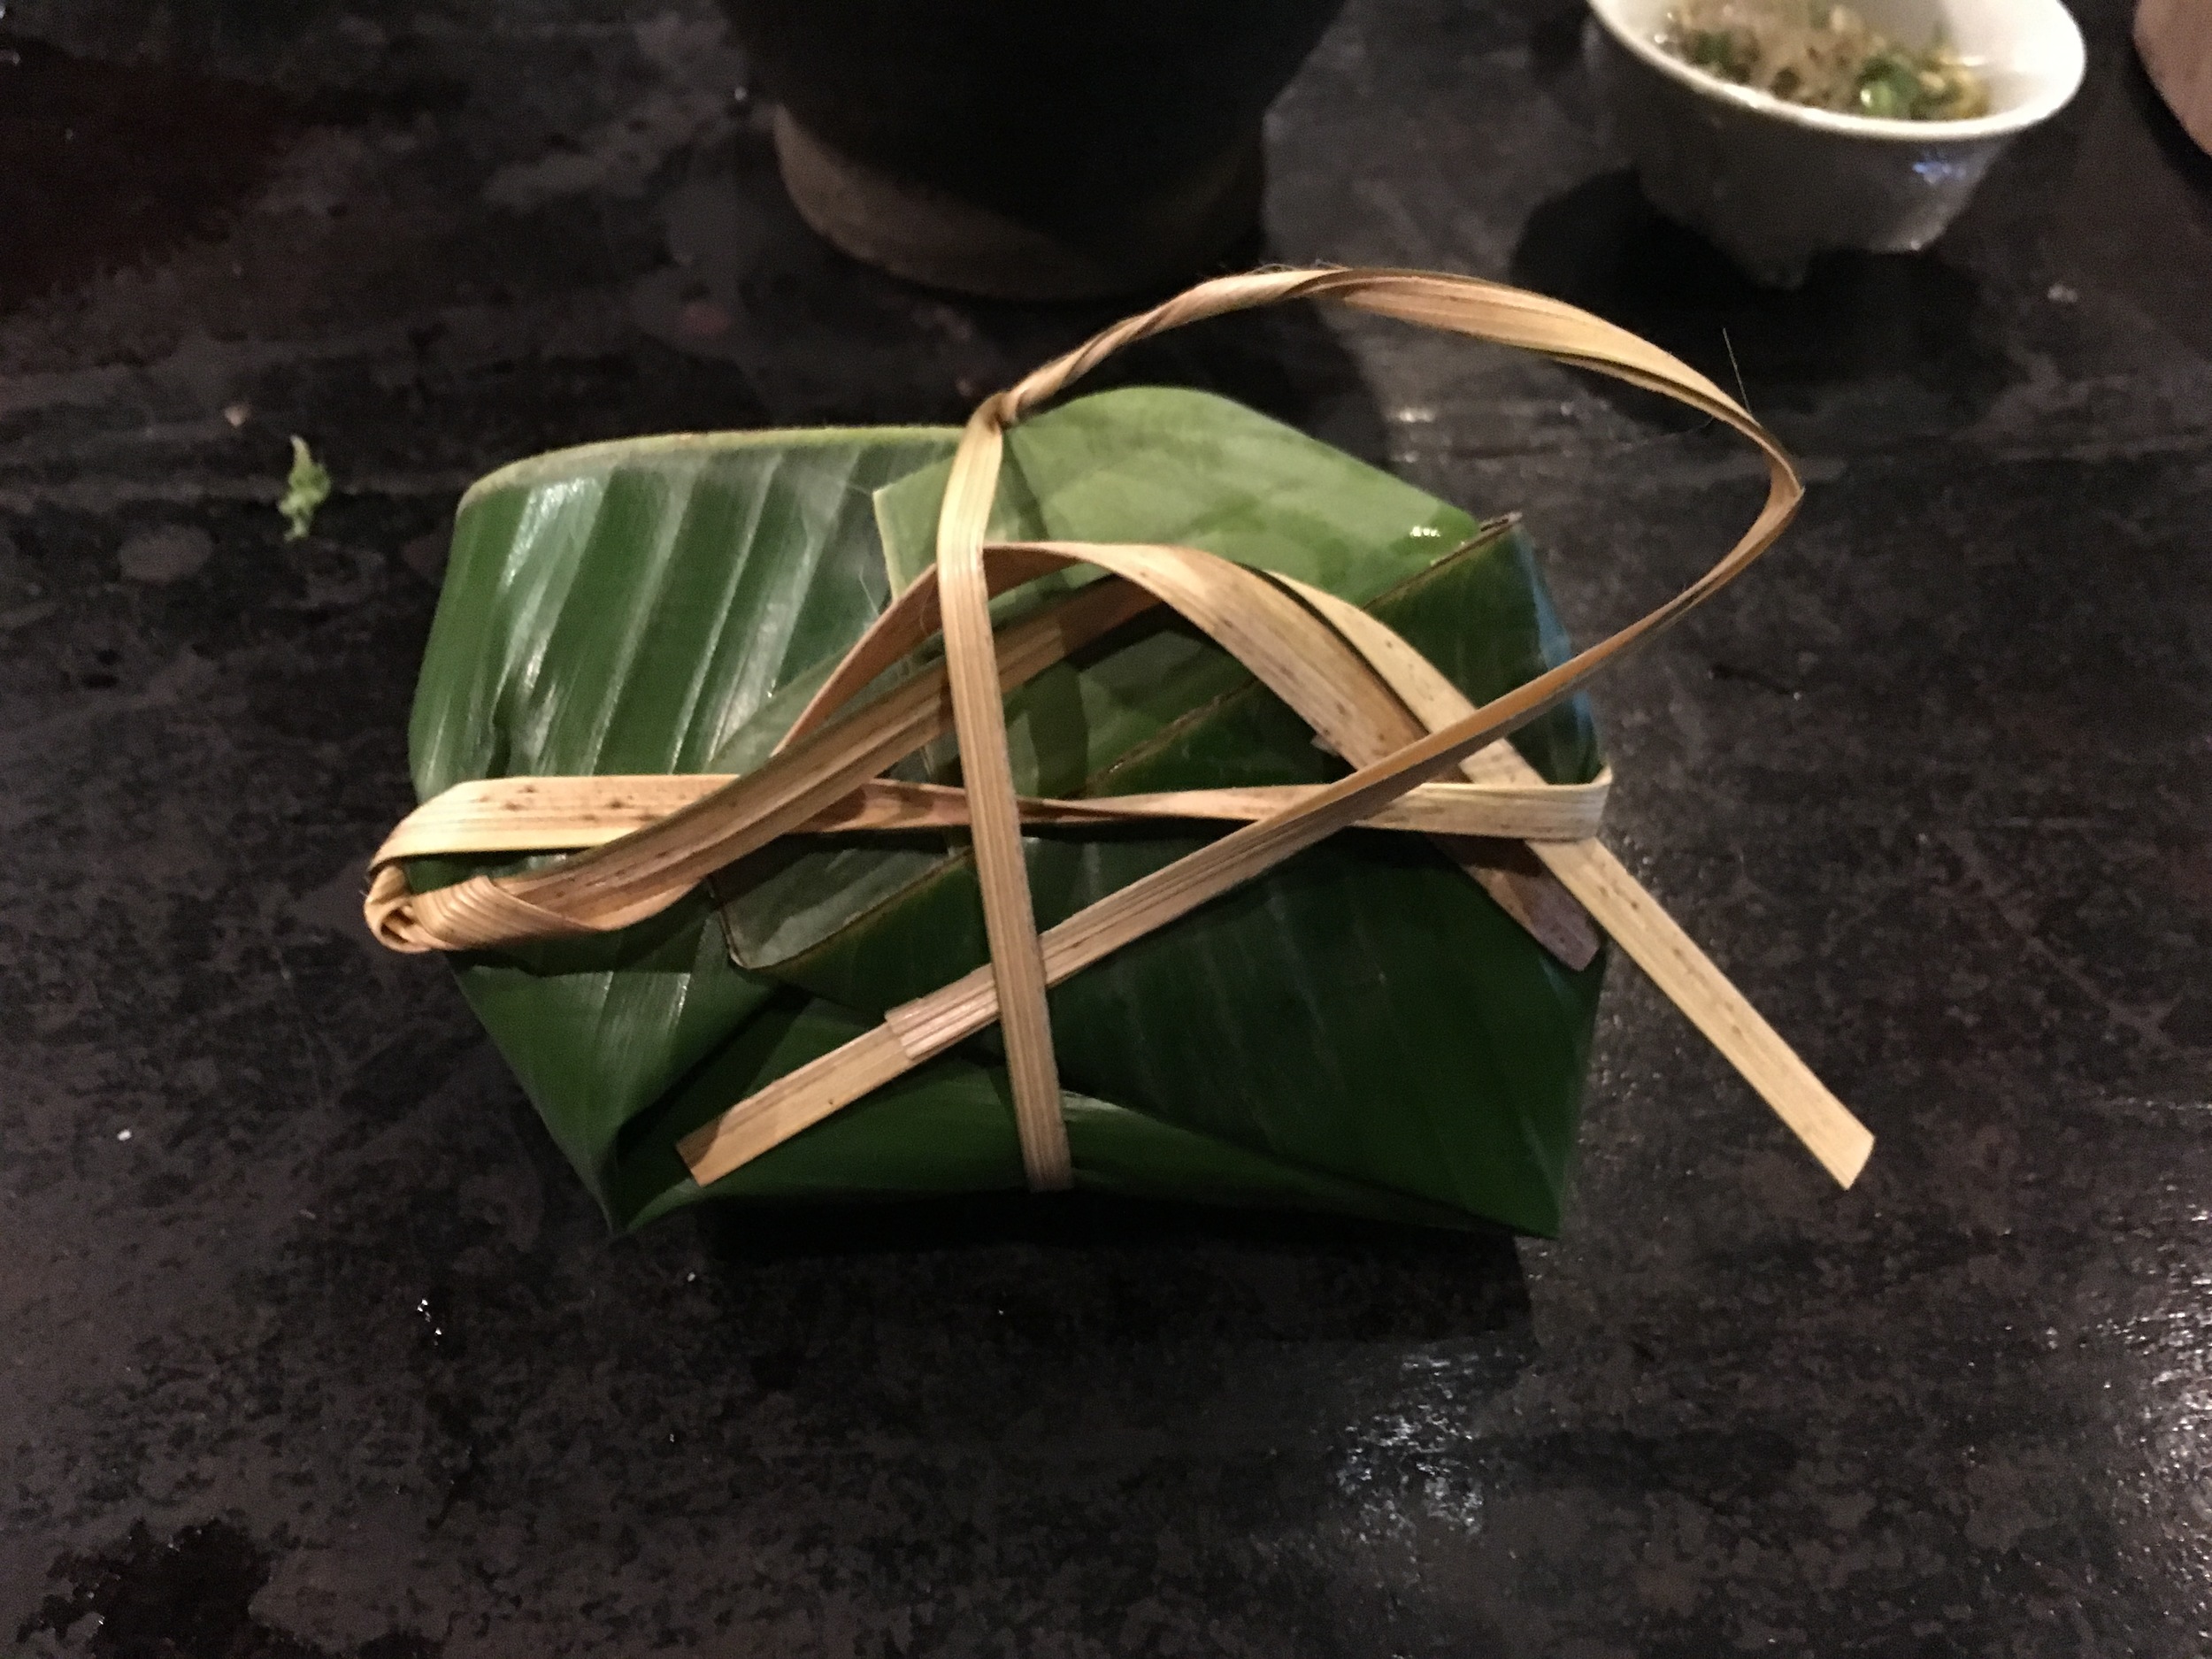 Tilapia wrapped in banana leaf